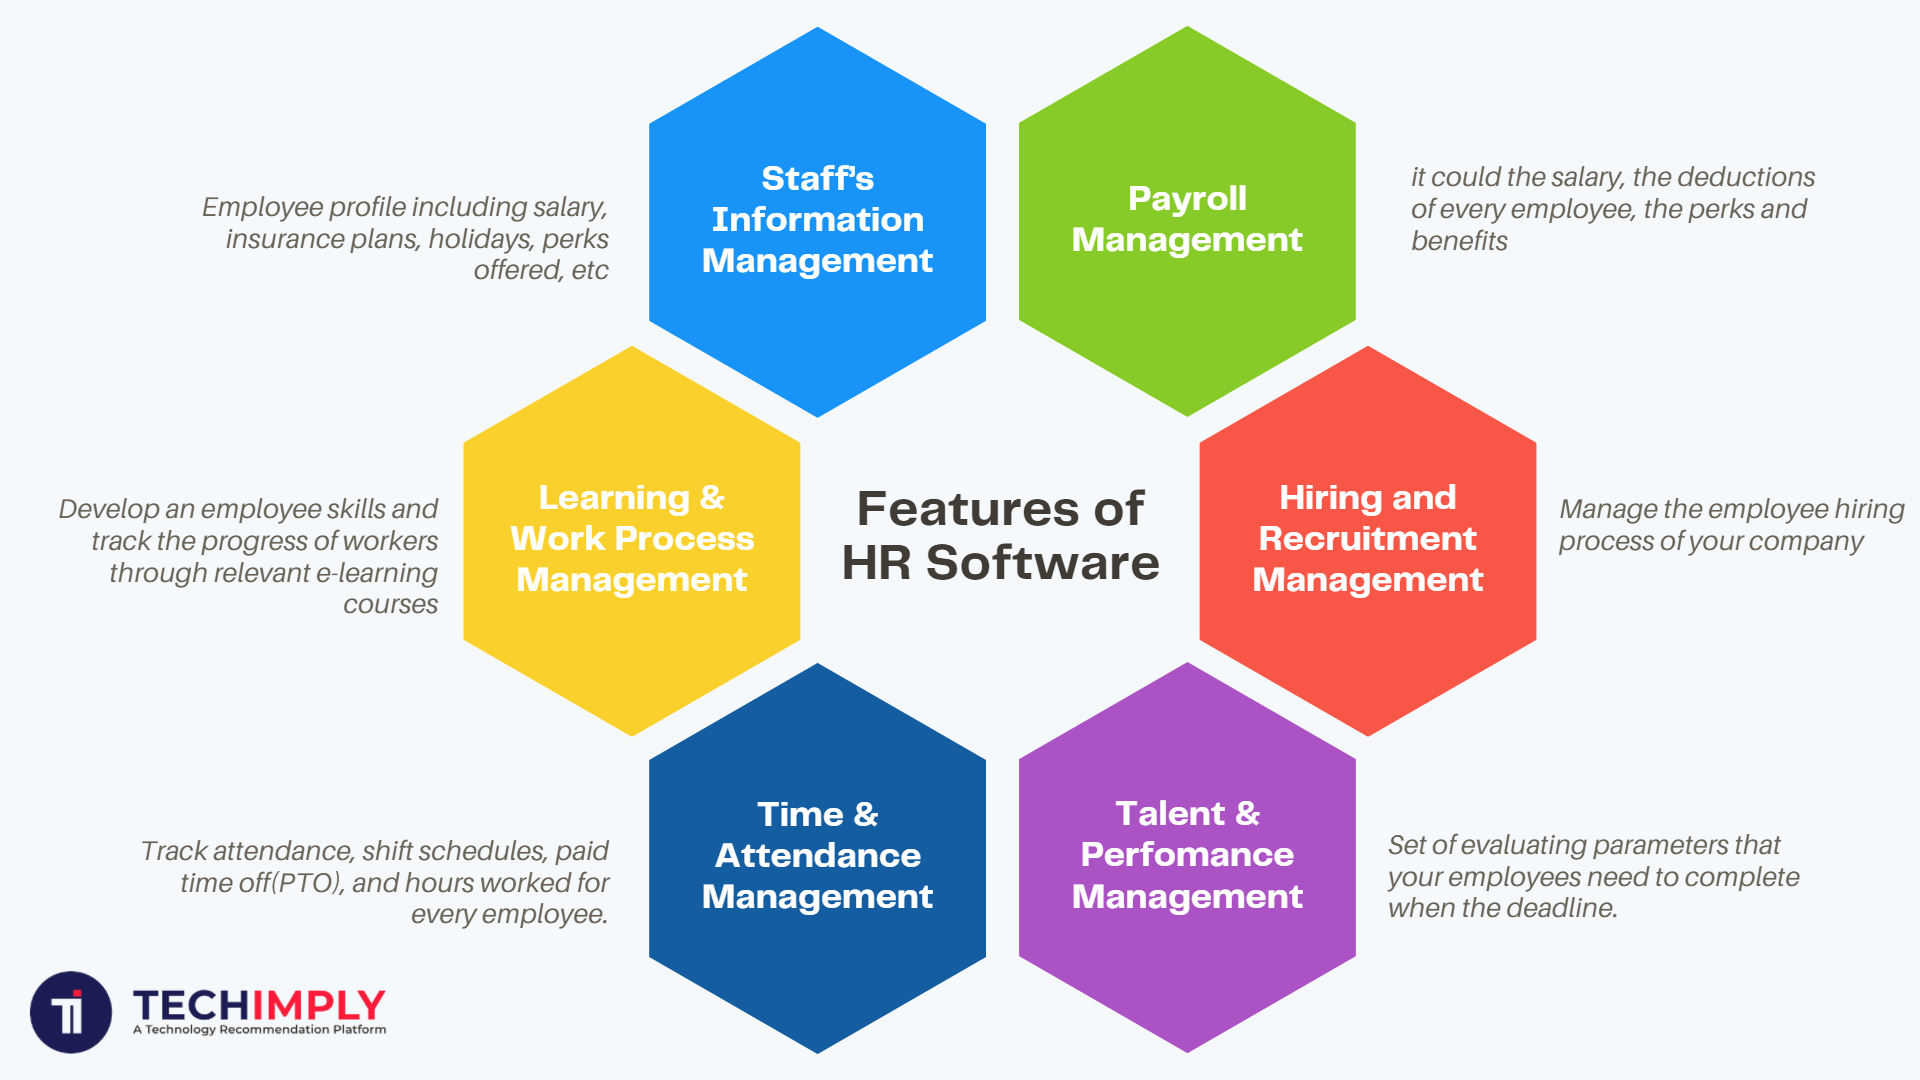 Features of HR Software